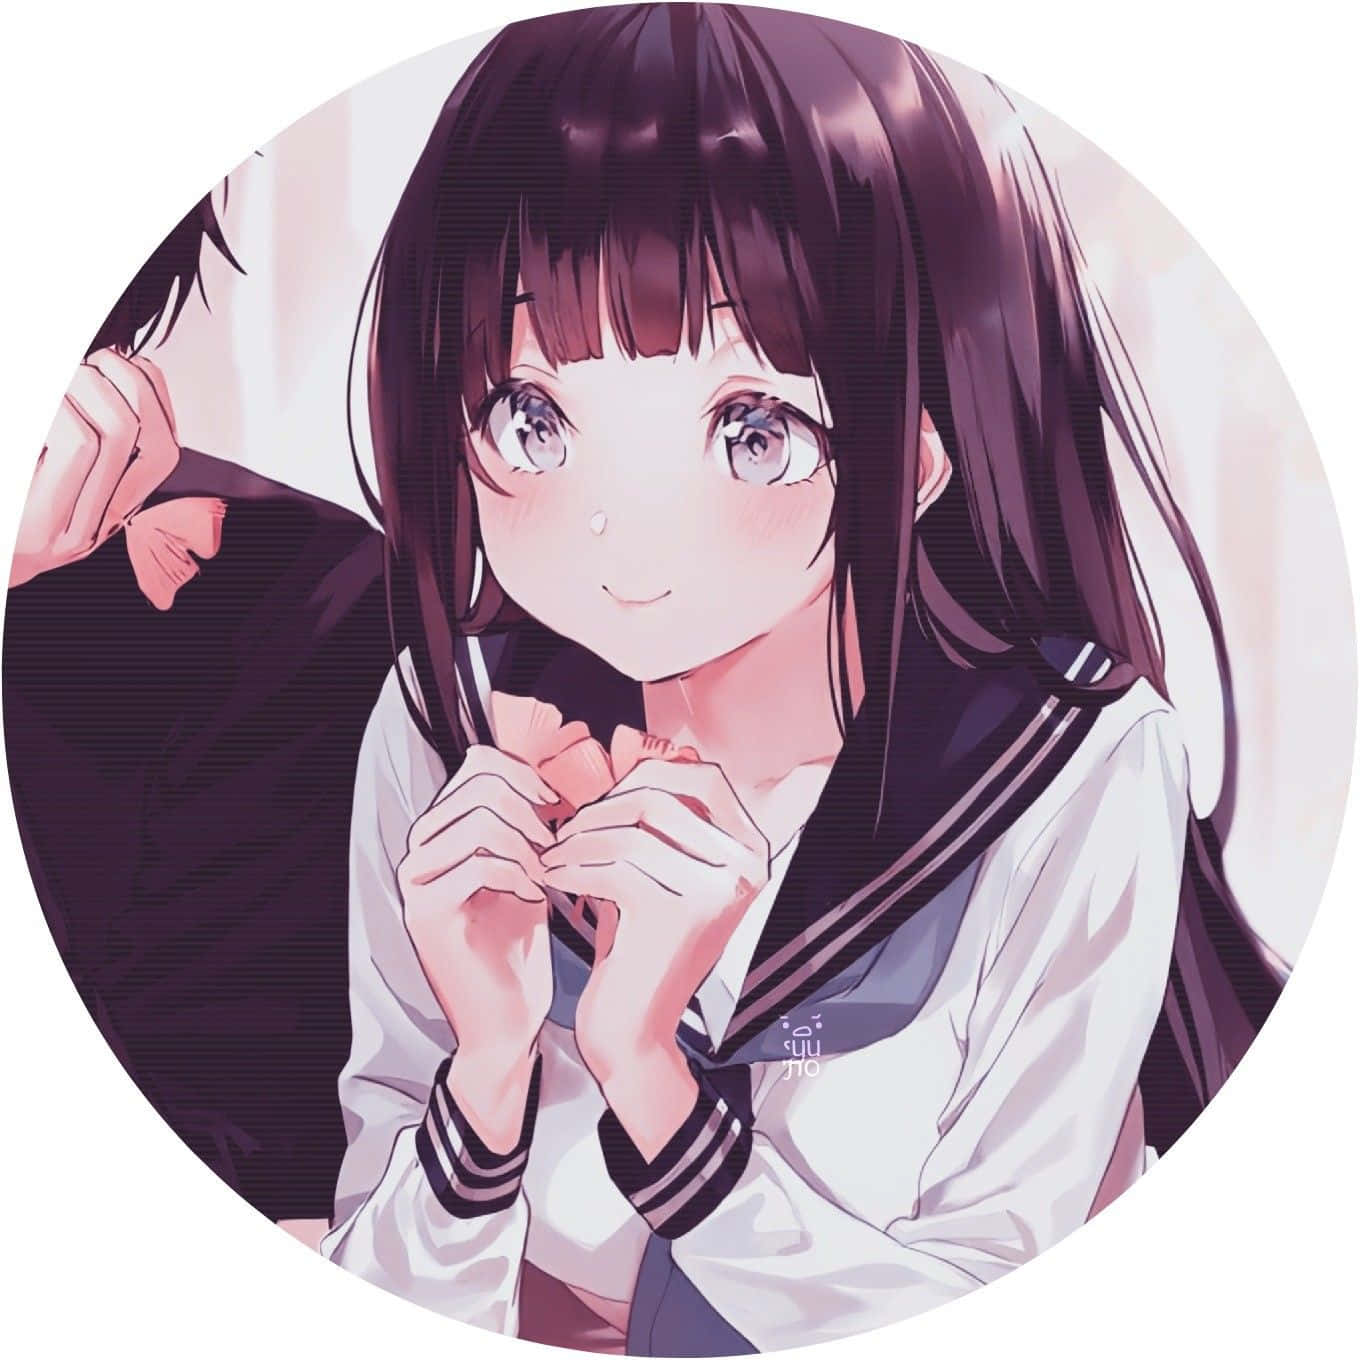 𓏲𓍢 anime matching profile pictures | aesthetic pfp 𓍯 𓈒𓄹 - YouTube